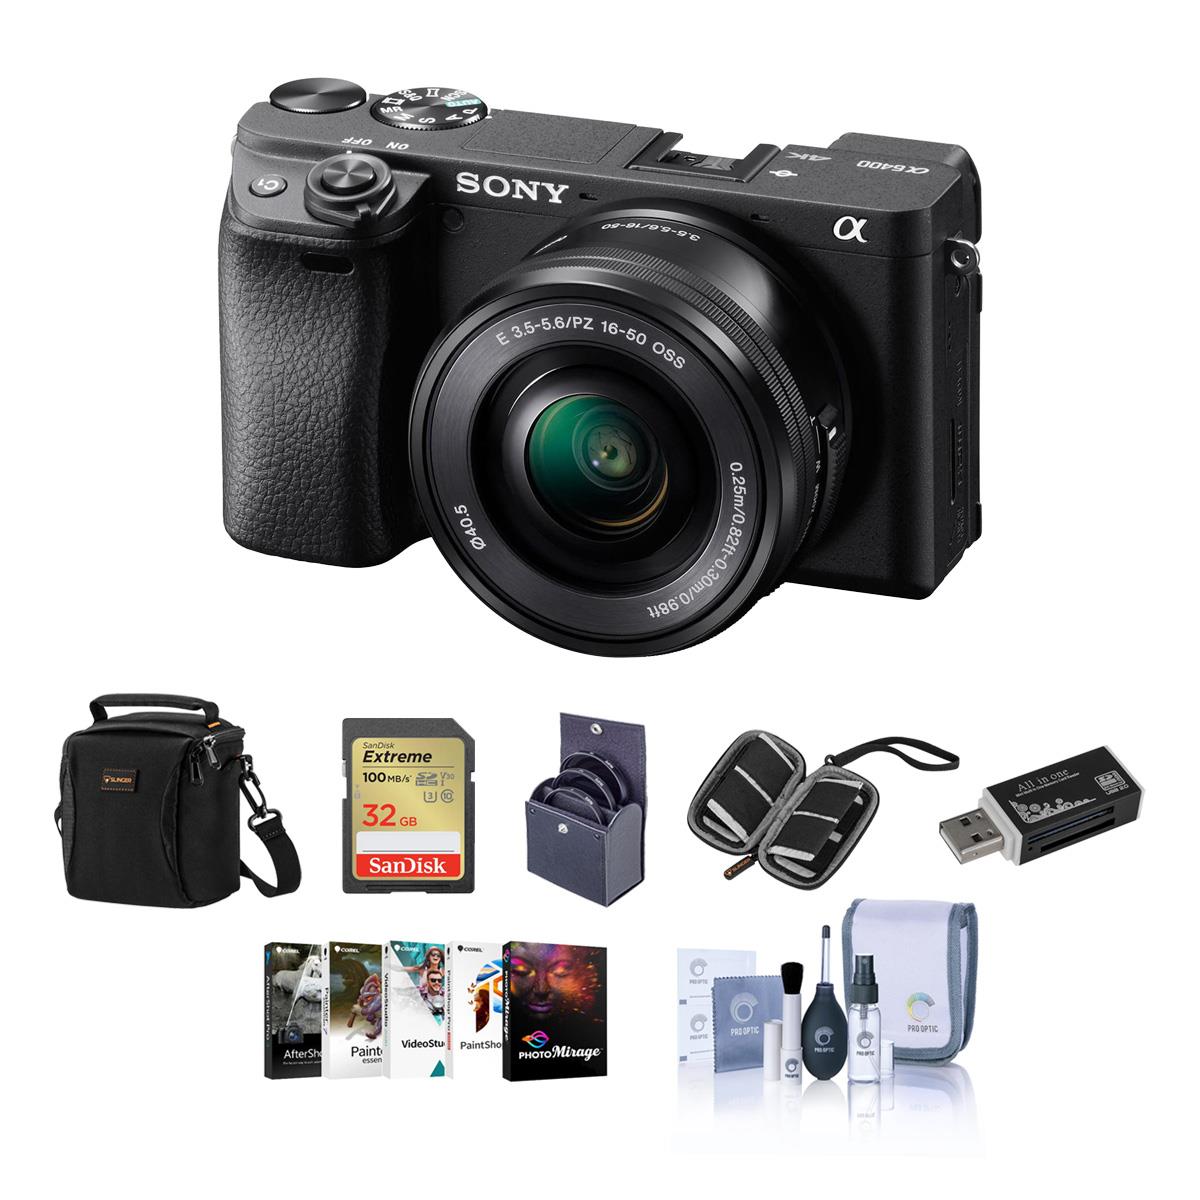 Sony Alpha a6400 Mirrorless Camera with 16-50mm f/3.5-5.6 OS Lens W/Free Acc Kit